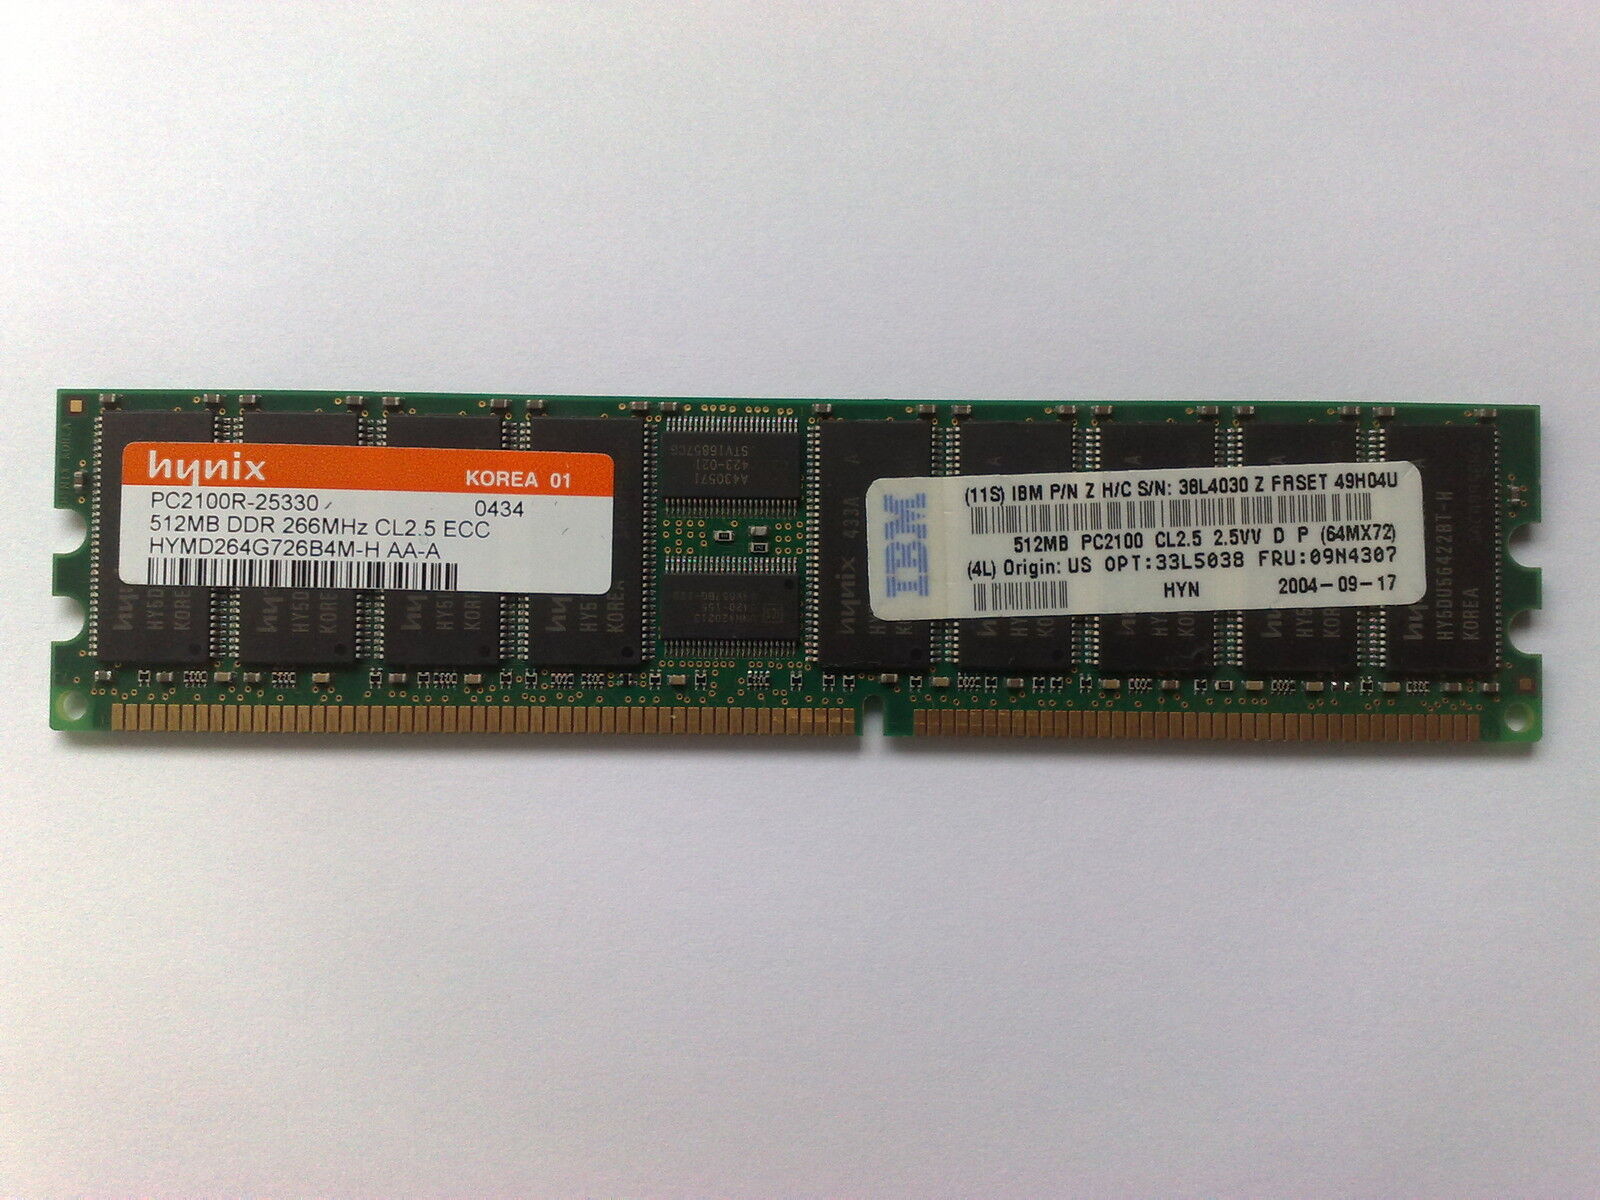 PAIR OF HYNIX HYMD264G726B4M-H 512MB PC2100 CL2.5 ECC IBM 09N4307 - 1GB IN TOTAL